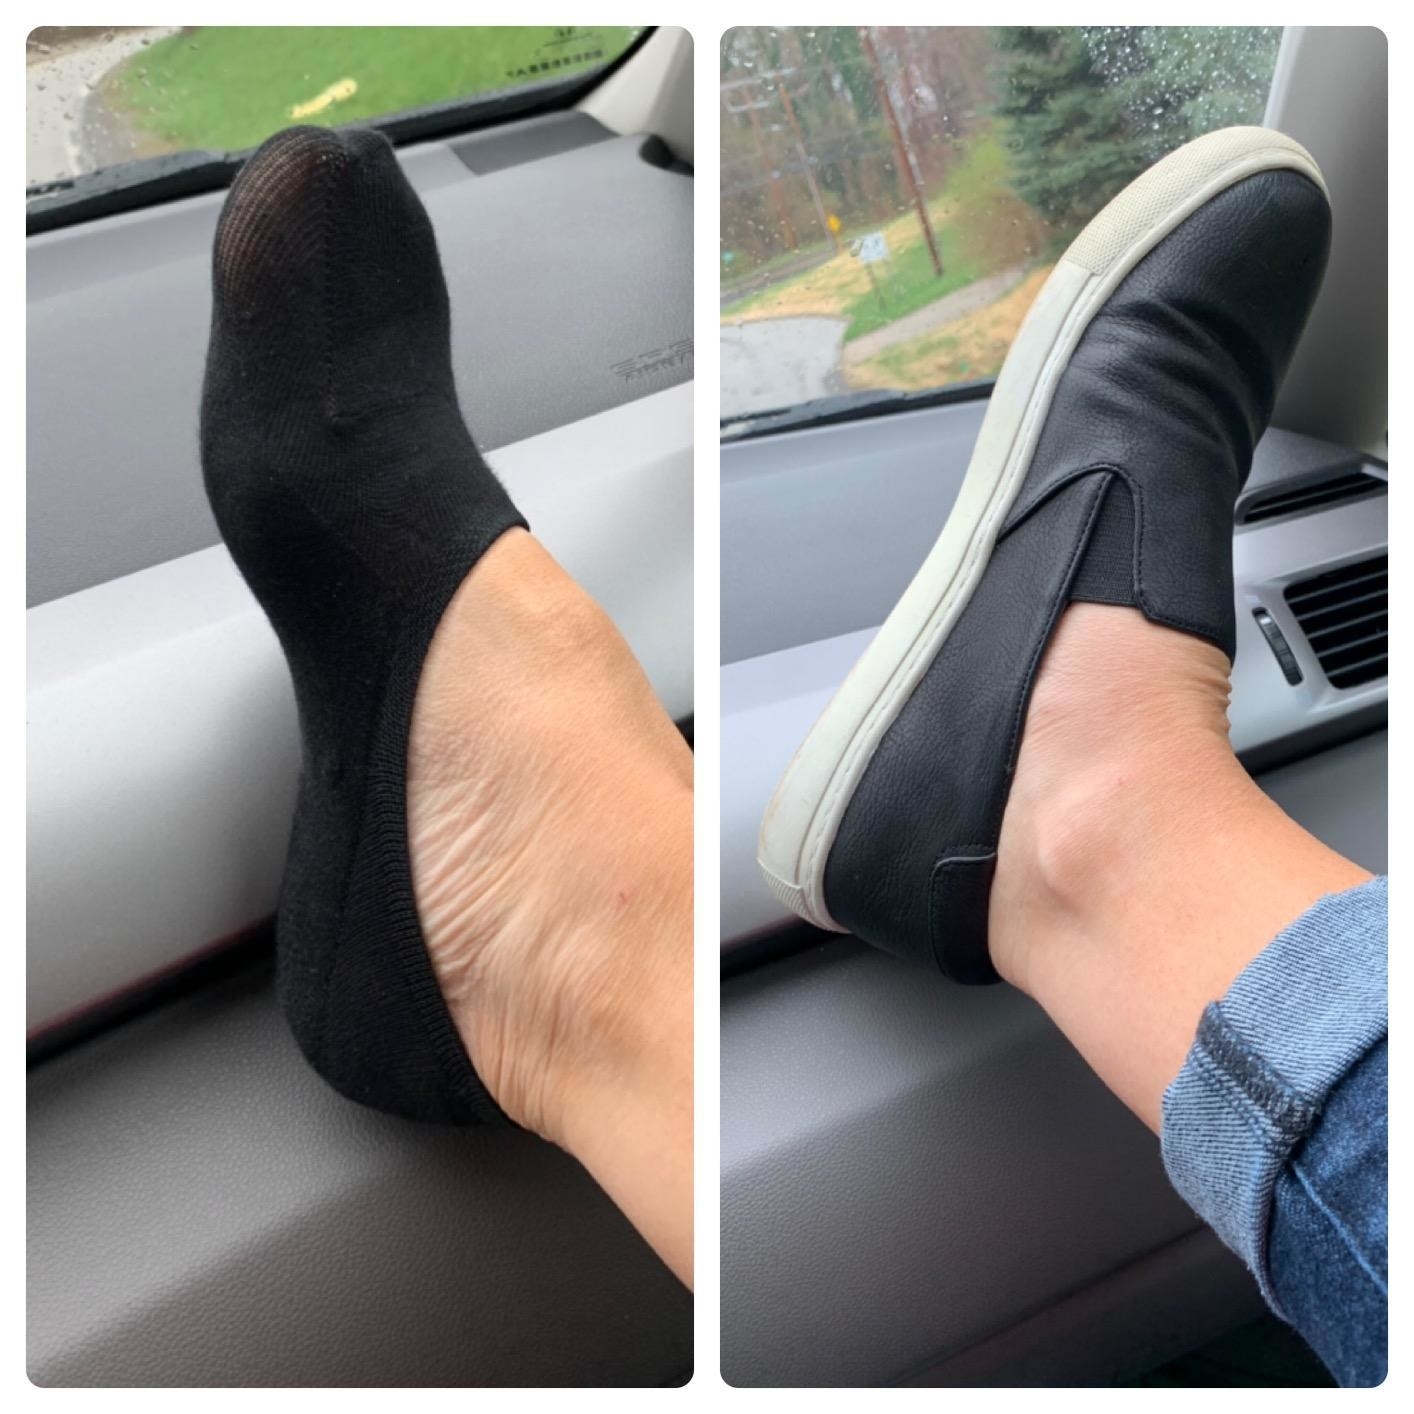 Reviewer wearing the socks showing you can&#x27;t see them at all while wearing slip-ons